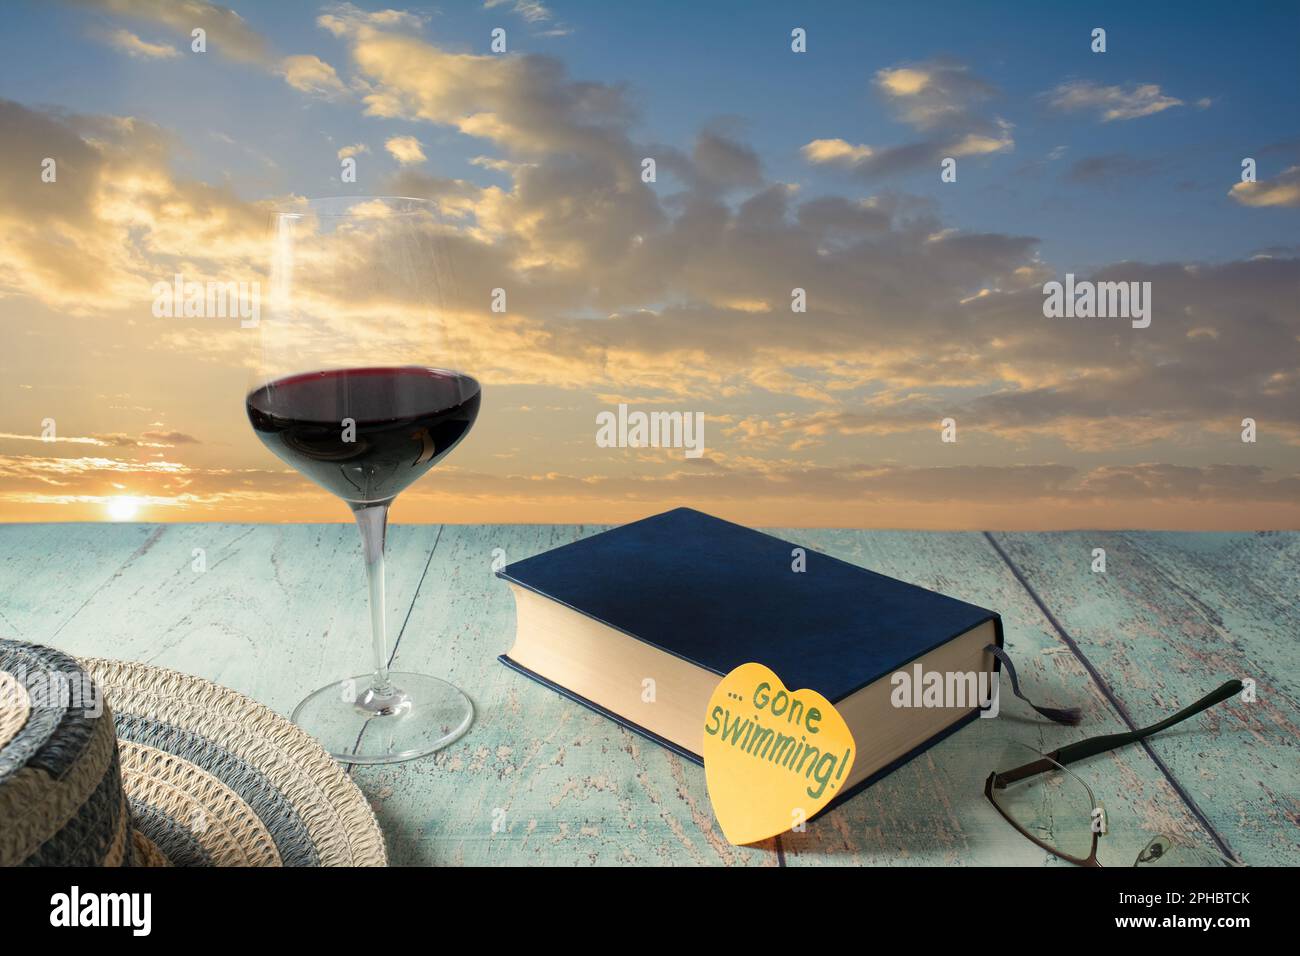 Gone swimming! A glass of red wine, a good book, a straw hat, a beautiful sunset, and a post-it note. The call of adventure and holiday pleasures. Stock Photo